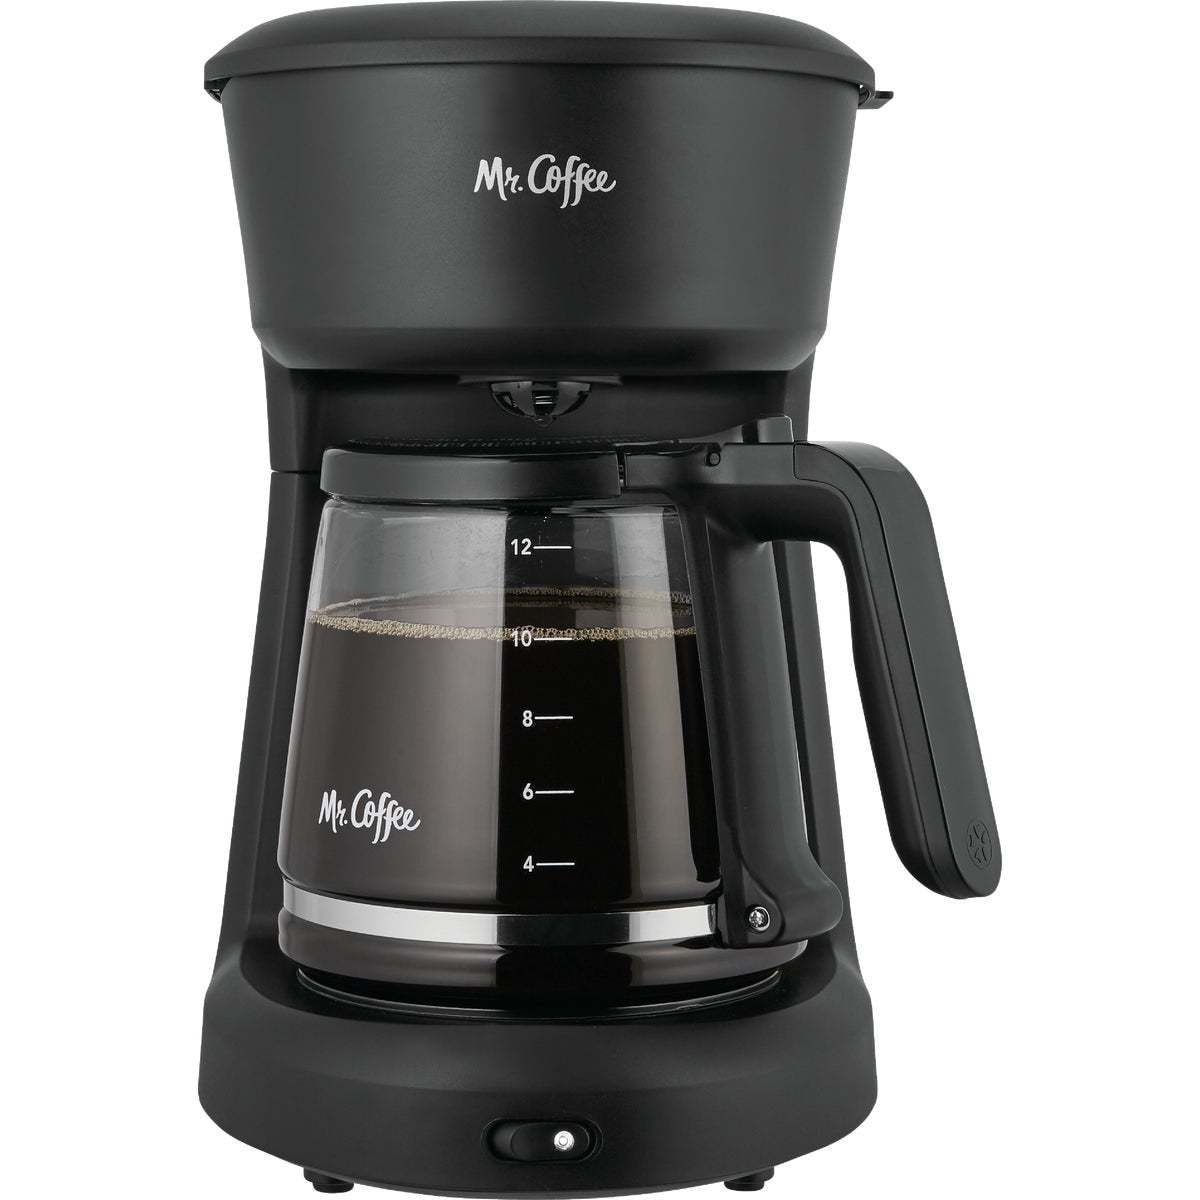 https://ak1.ostkcdn.com/images/products/is/images/direct/07143bf80ed7029c00e6037b63d2a4a1e7d2a02f/Mr-Coffee-12-Cup-Switch-Black-Coffee-Maker---1-Each.jpg